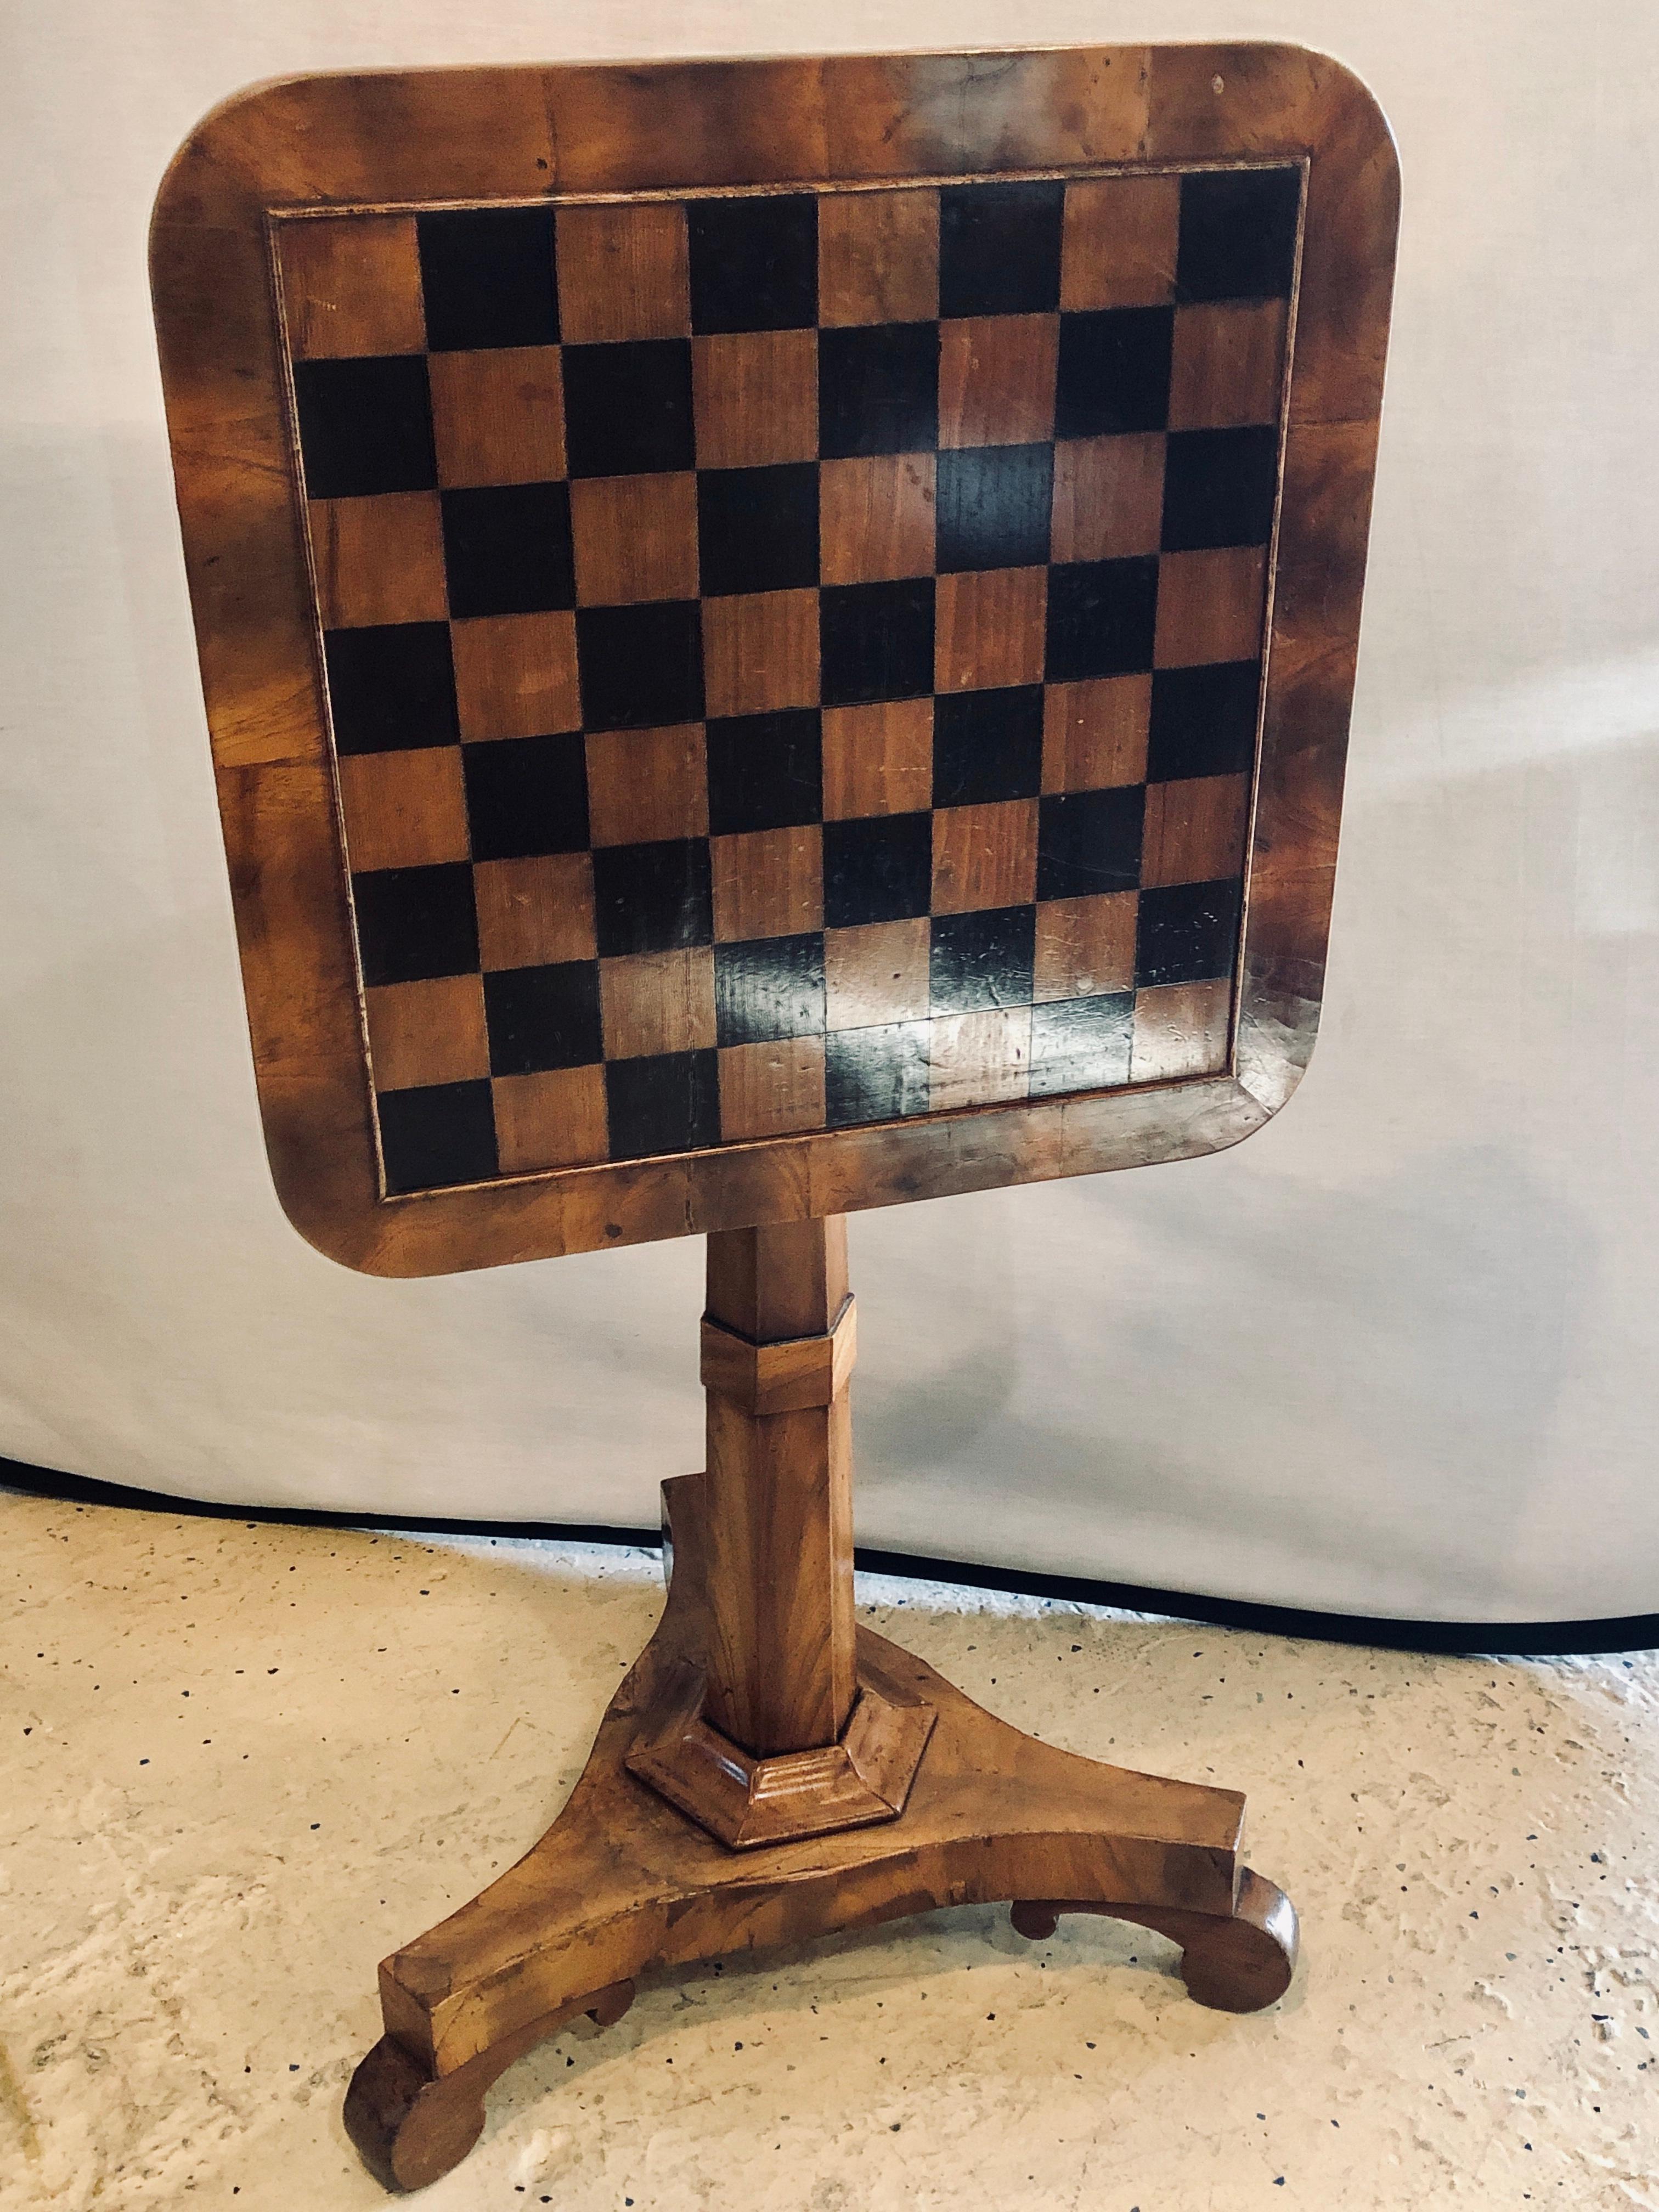 A 19th century English tilt-top game checkerboard or card table. This single pedestal flip top game table sits on a tri pod base and is functional and easy to use.